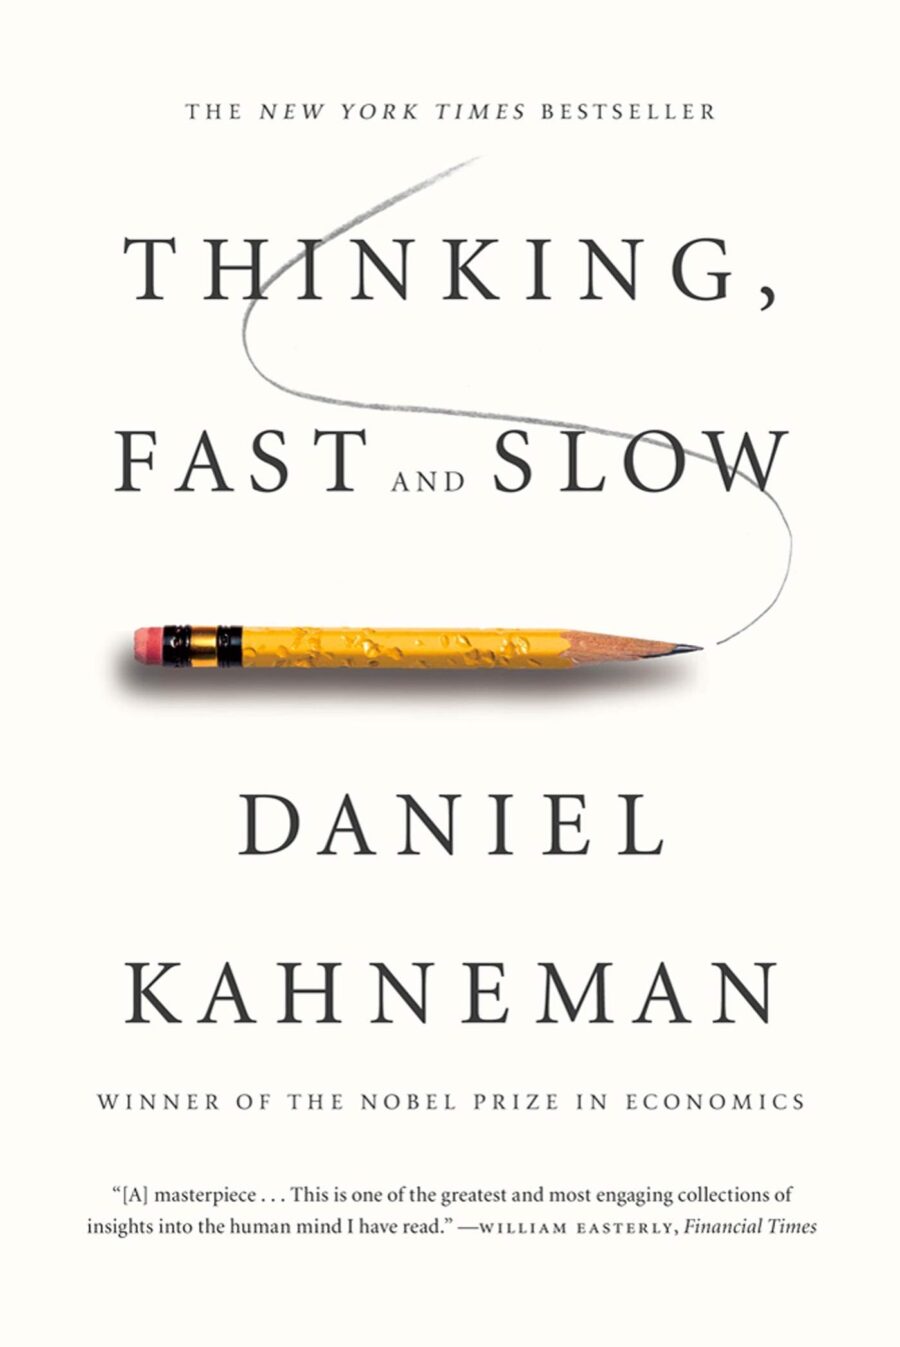 Unleashing the Power of Thought: Exploring the Intricacies of “Thinking, Fast and Slow”